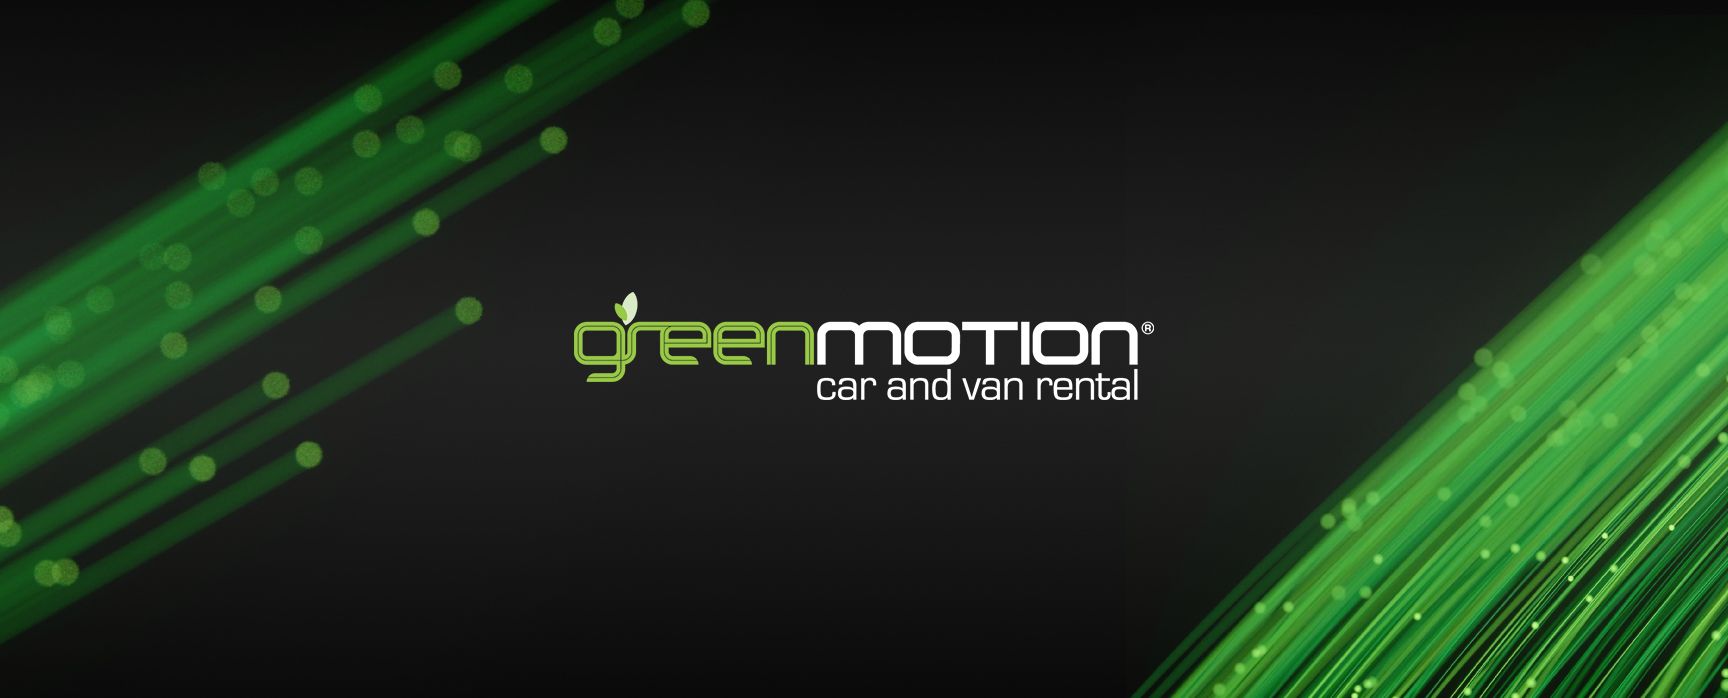 Green Motion logo and light trails